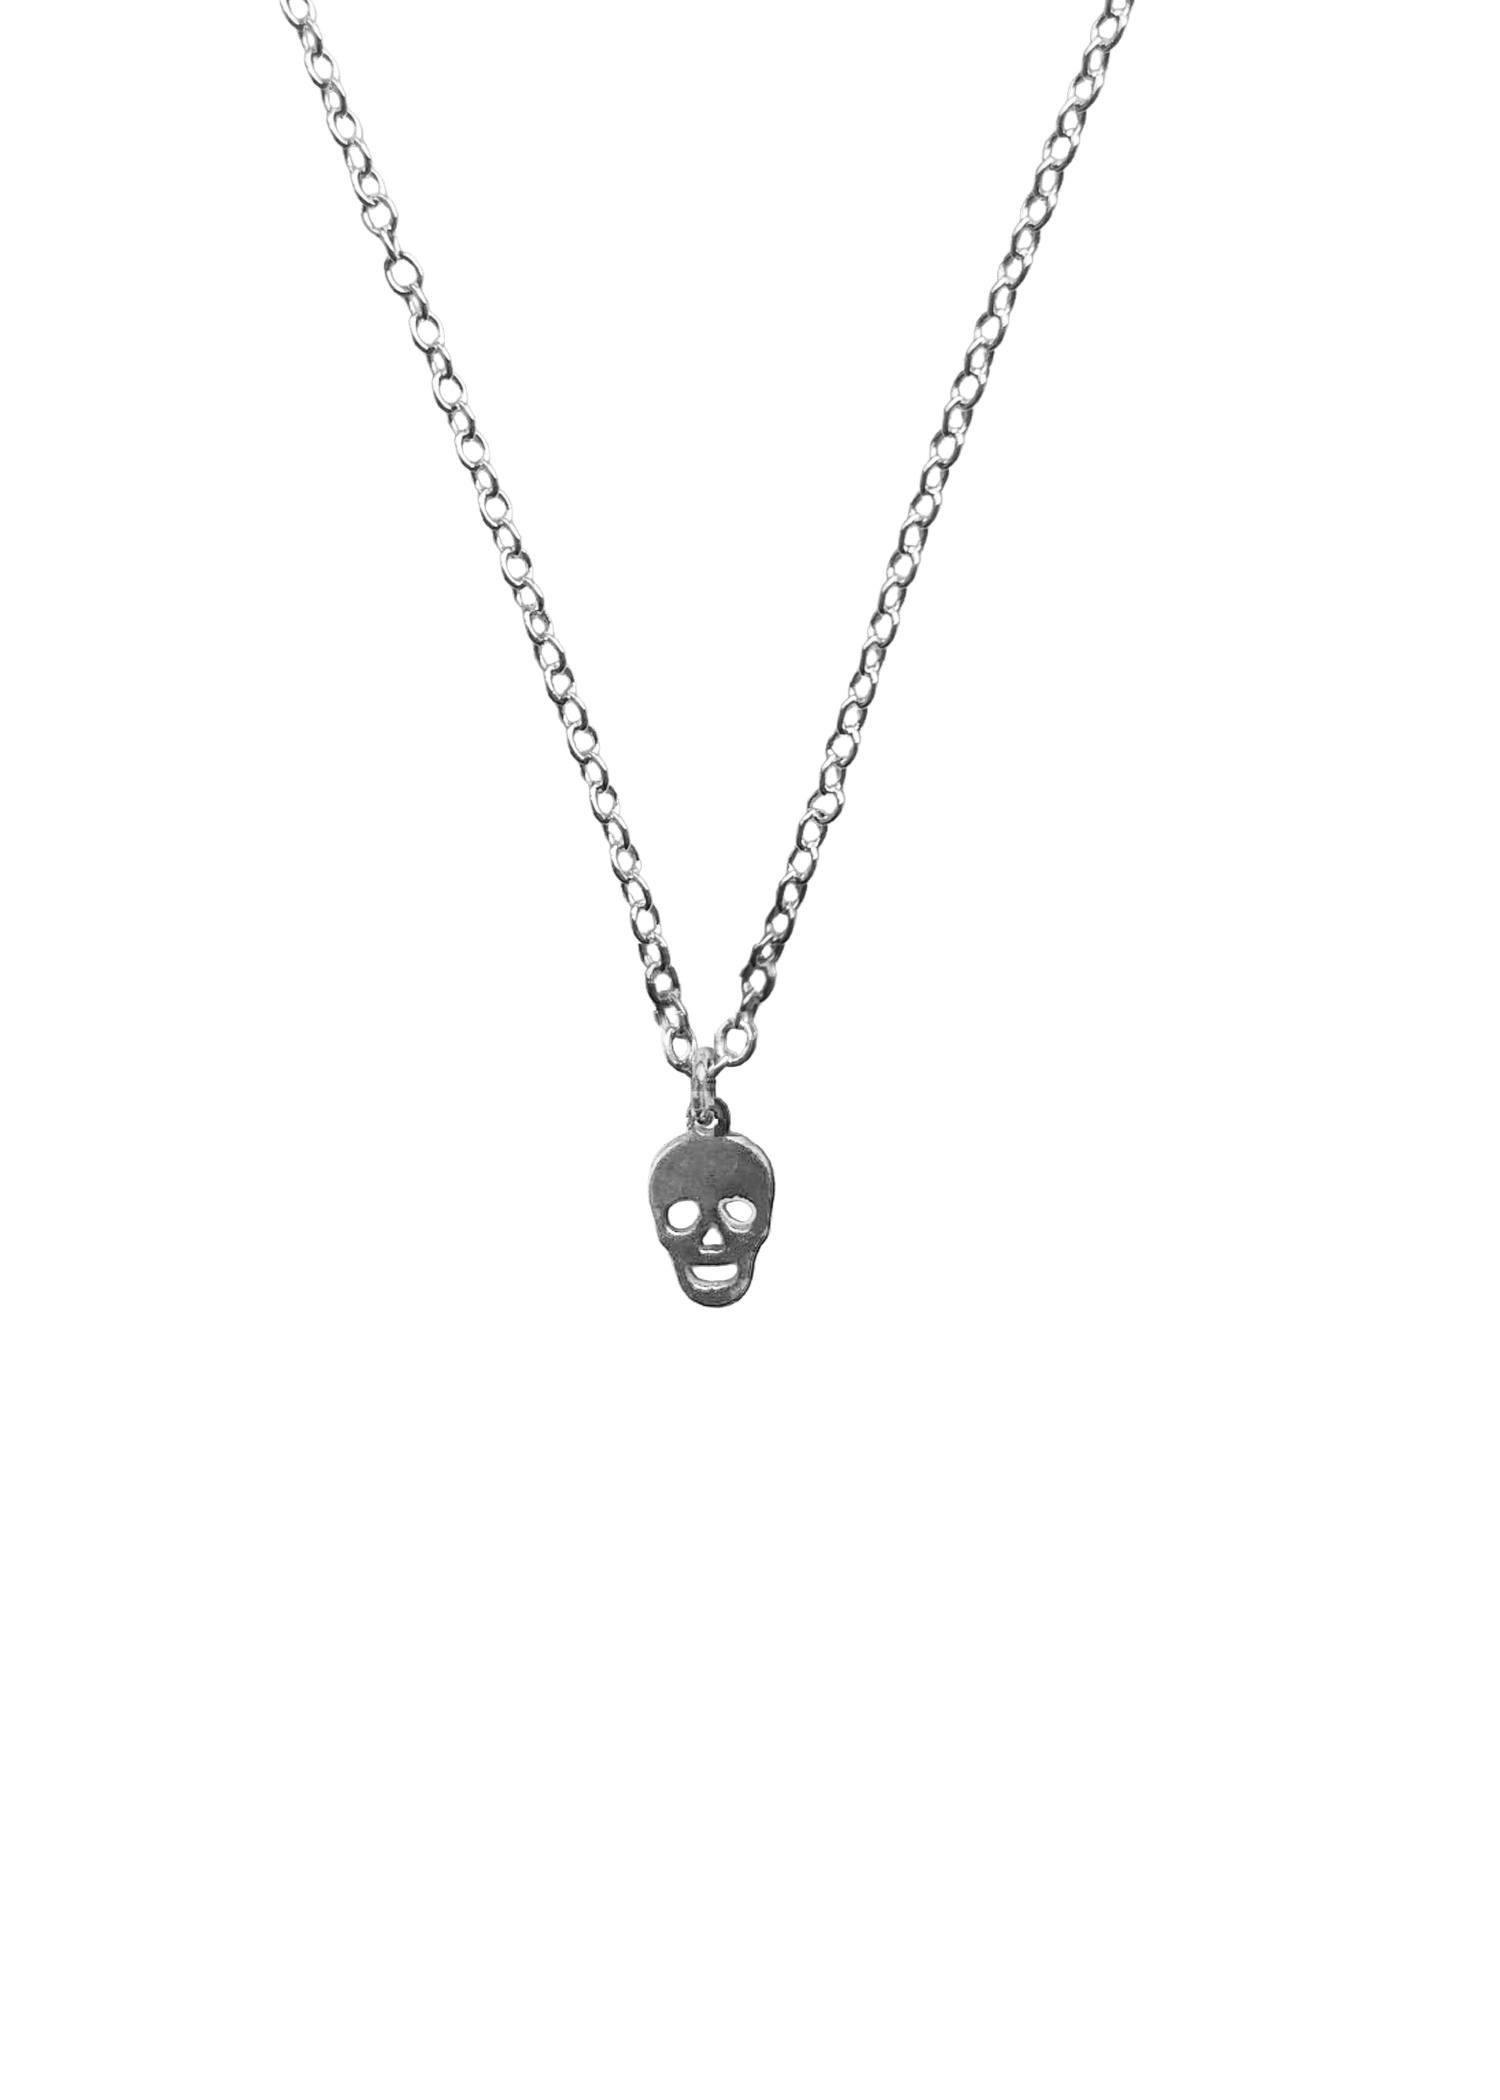 Skull Charm Necklace - Silver - offe market